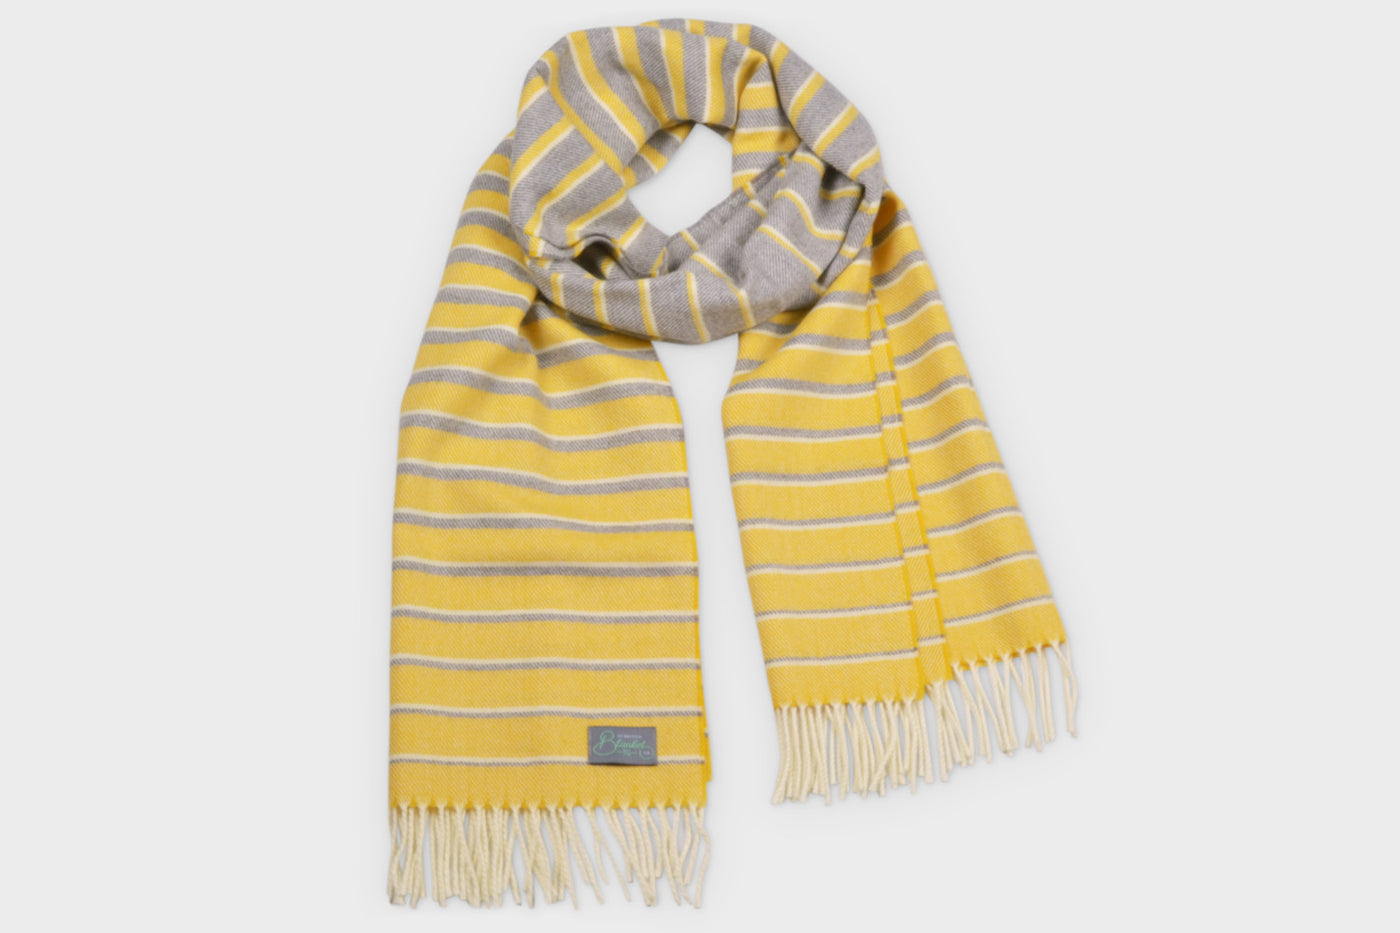 A yellow and grey oversized blanket scarf by The British Blanket Company